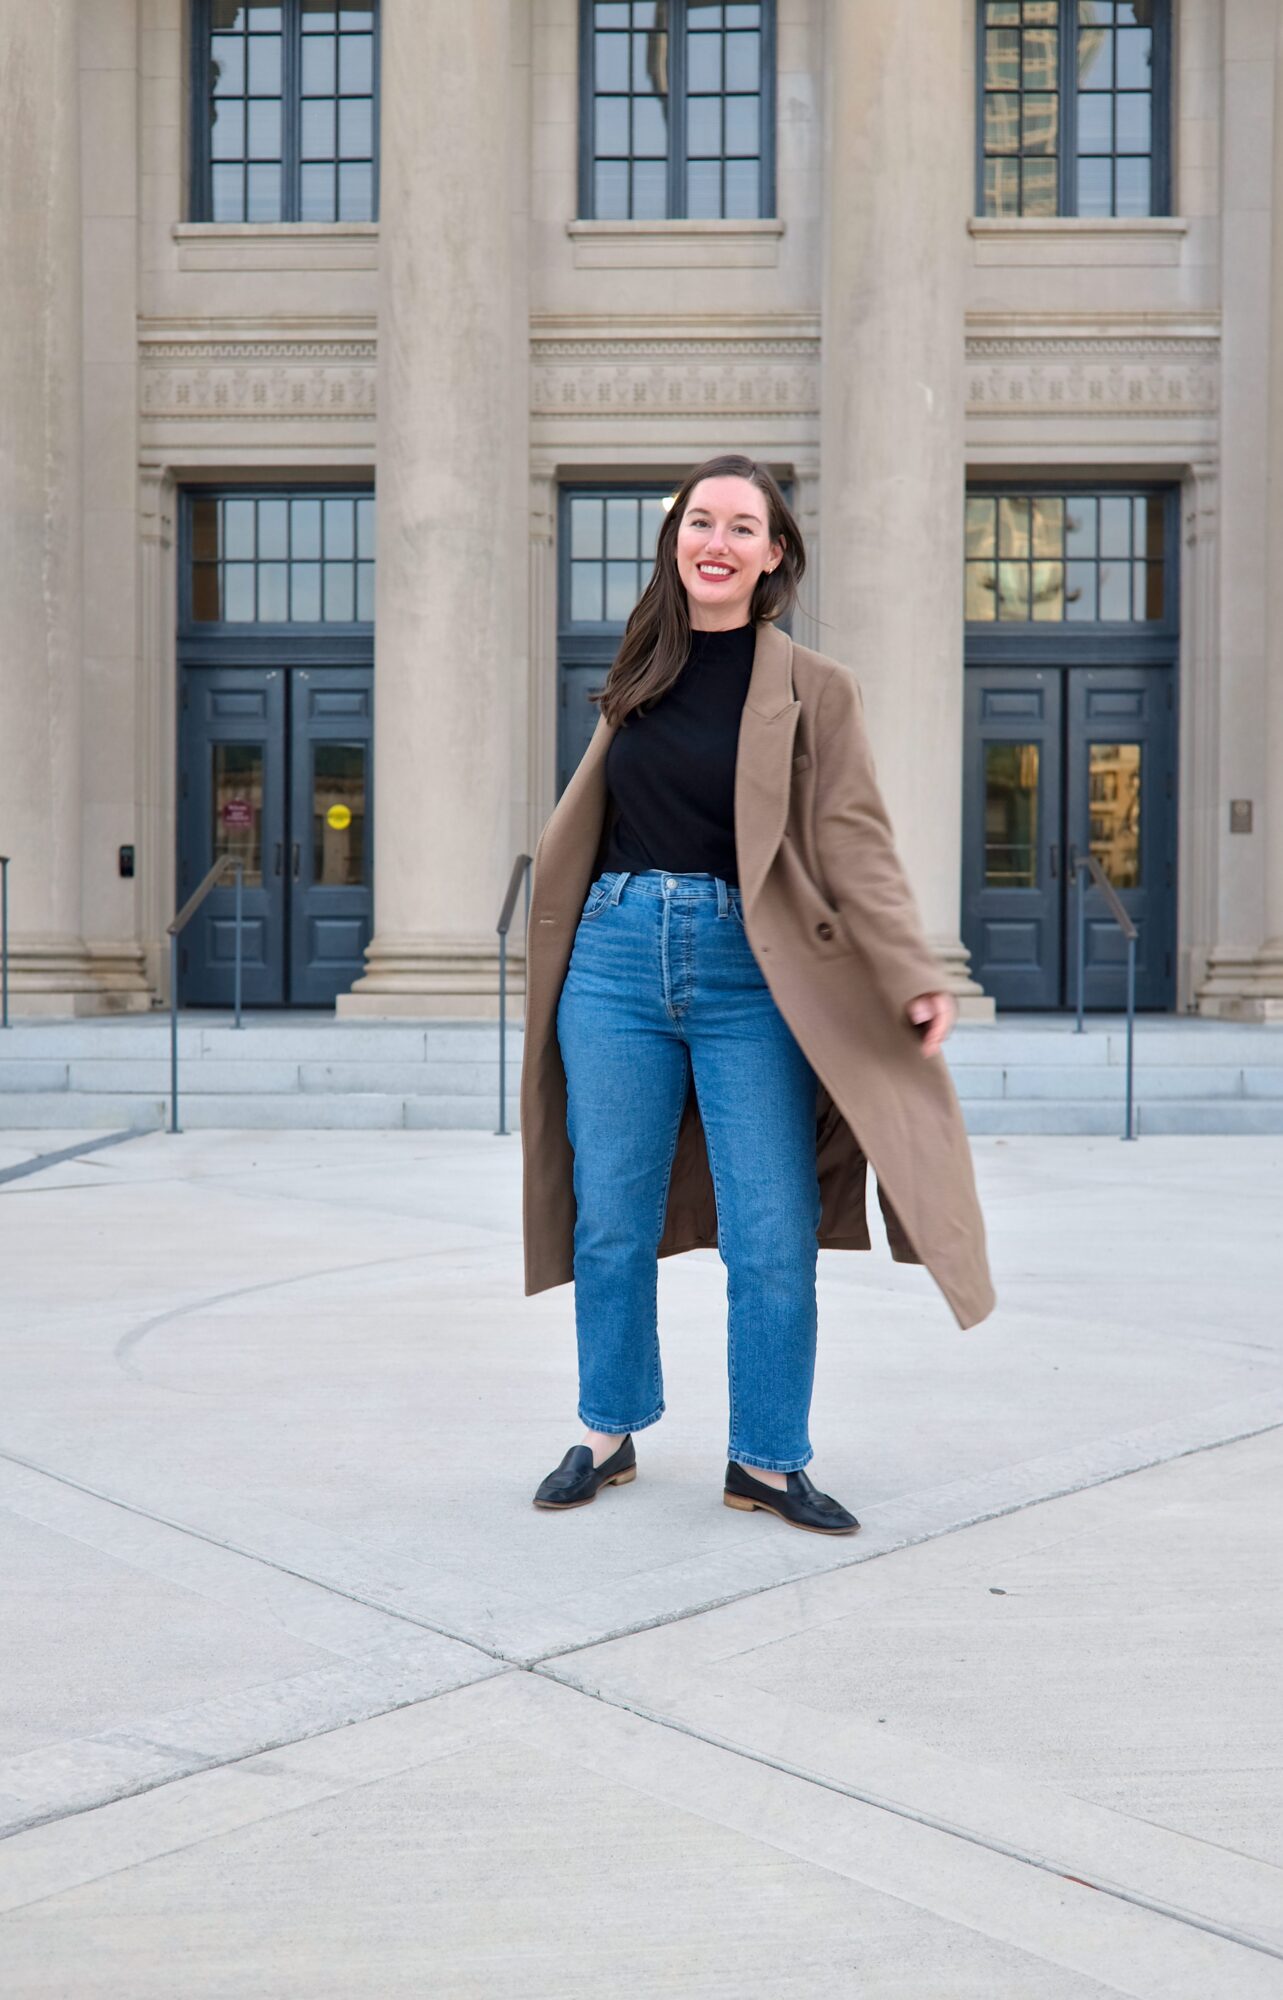 Alyssa wears the Italian Wool Double-Breasted Coat with jeans and a black top and twirls a little